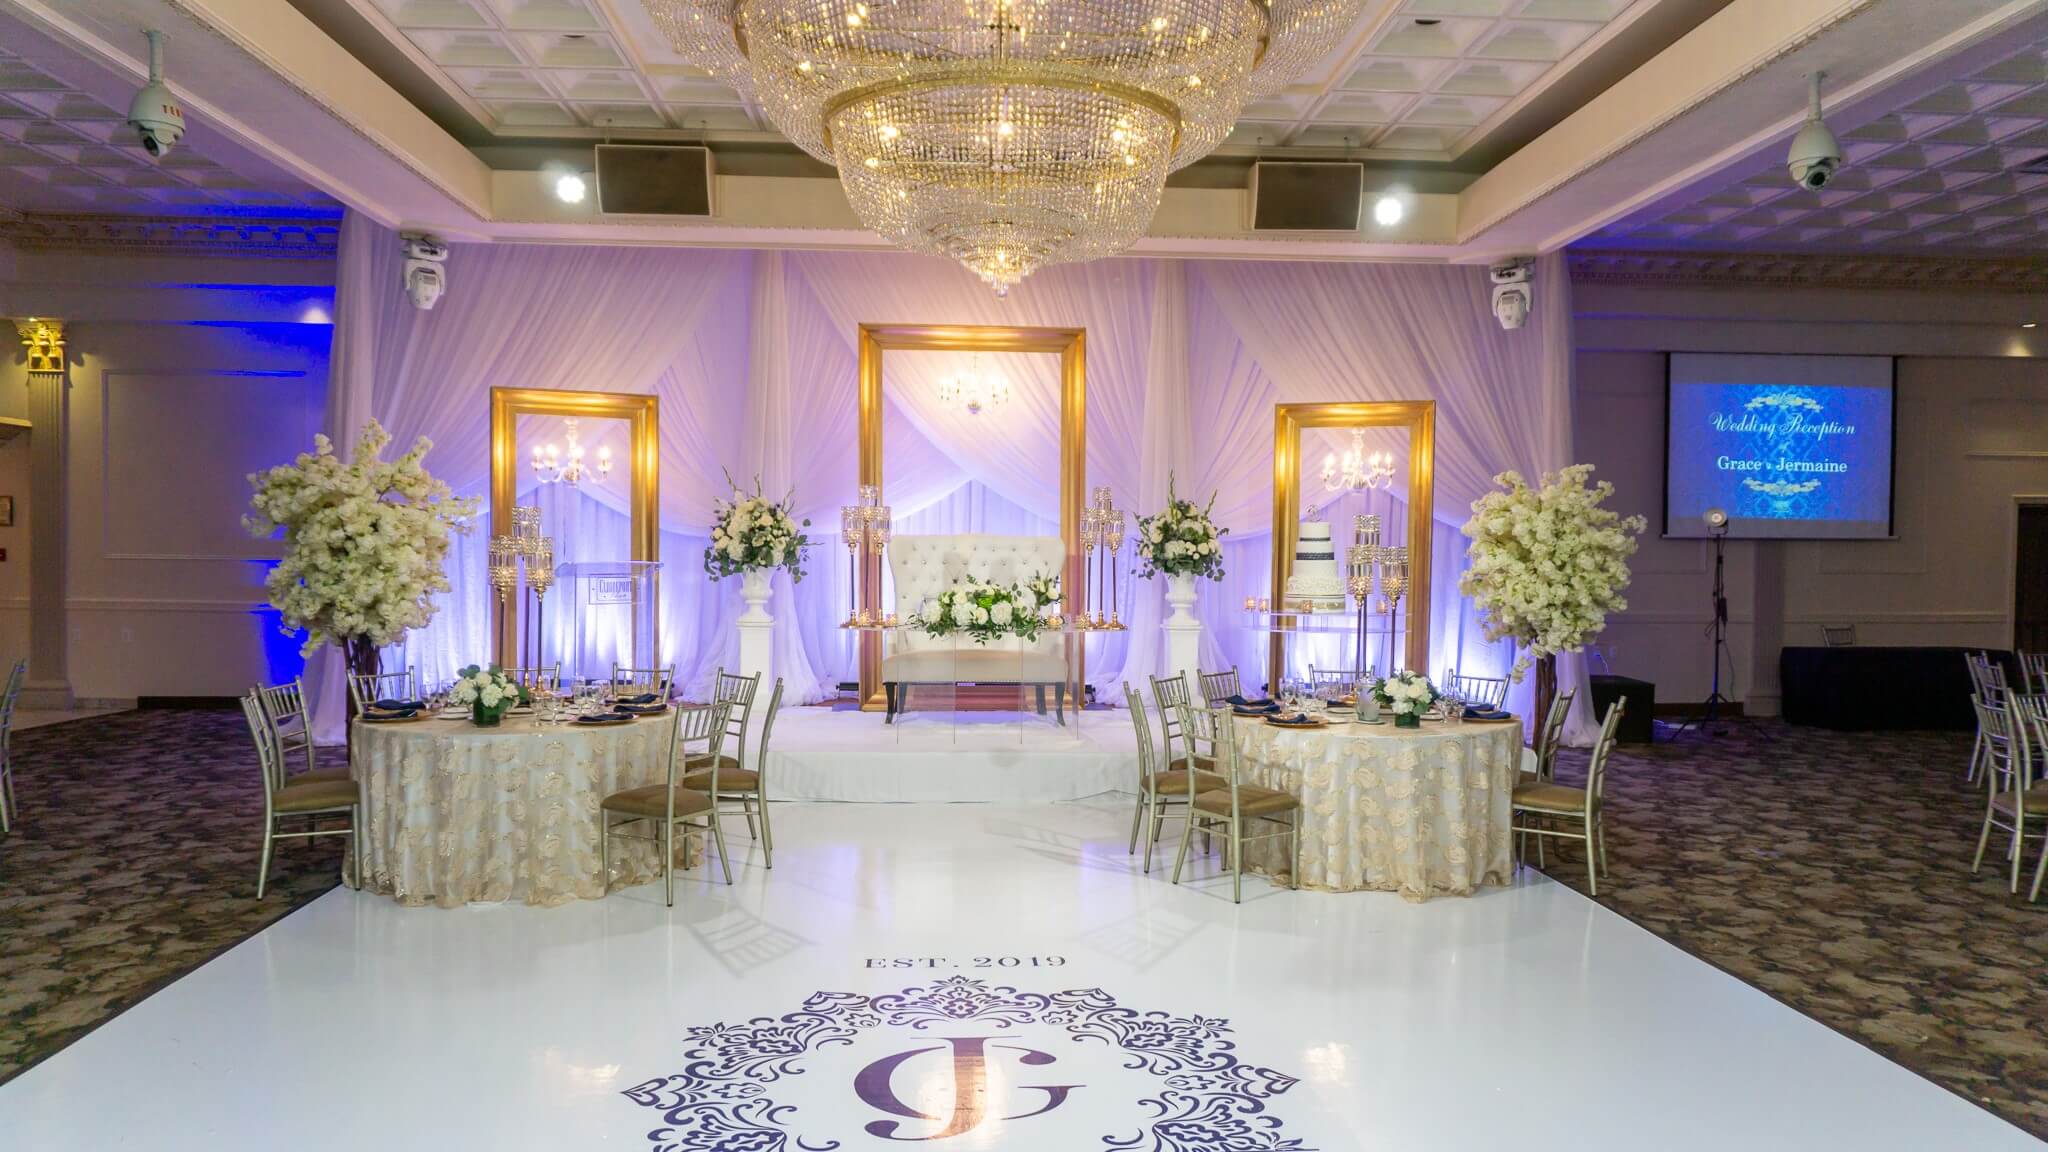 How to Incorporate A Unique Theme into Your Banquet Hall Event